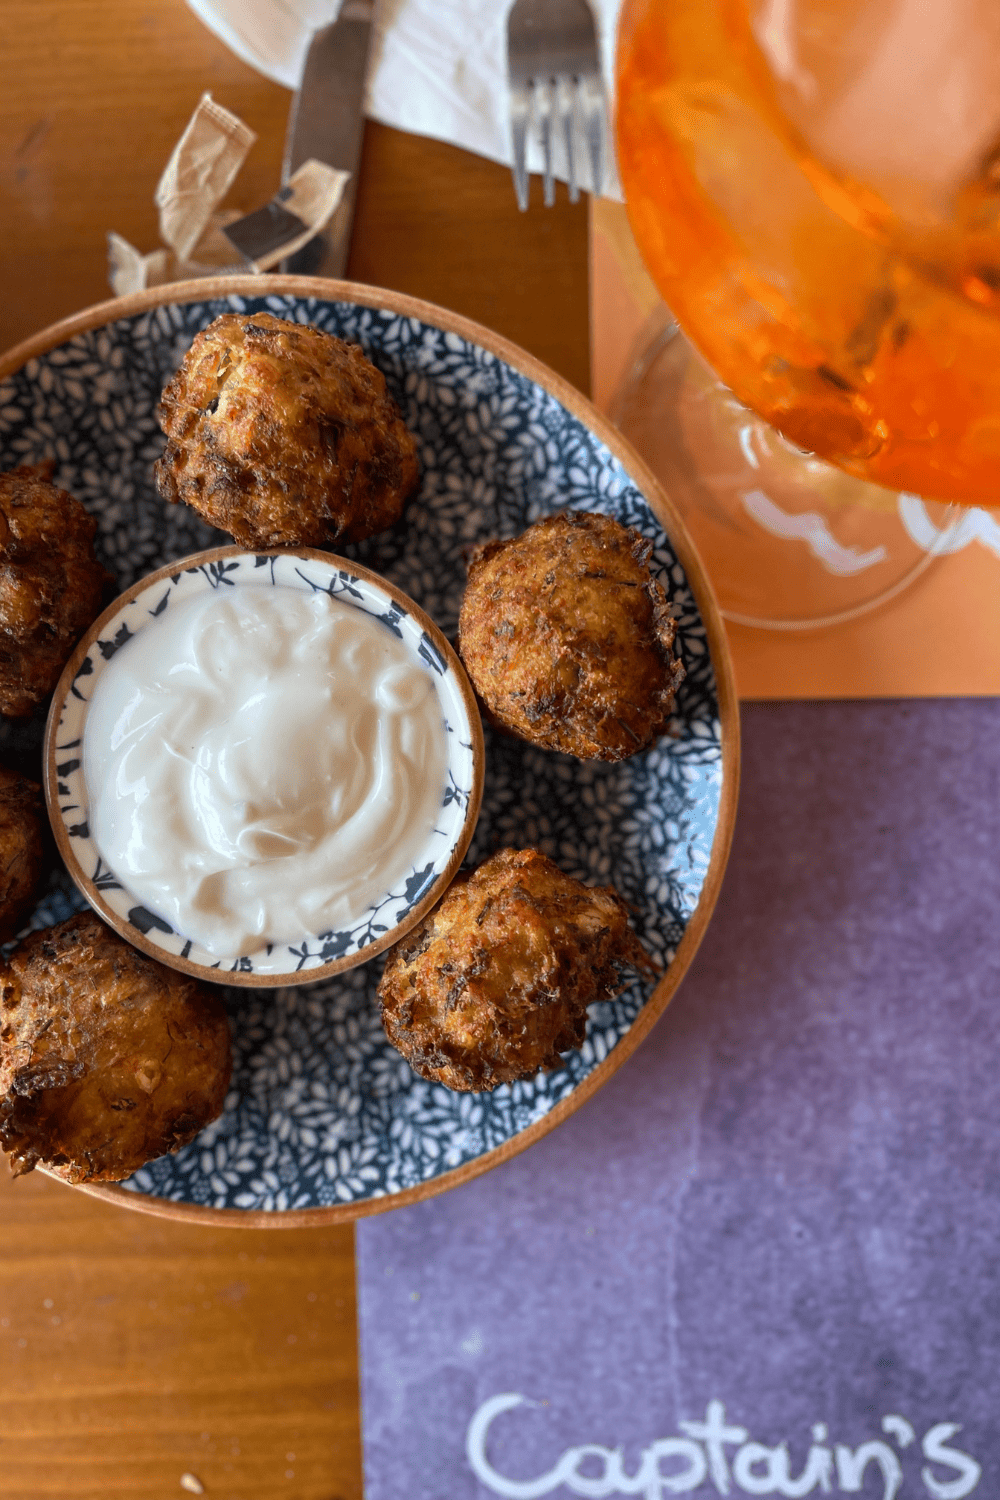 A close-up of a dish with fried zucchini balls served with a bowl of creamy tzatziki sauce on a decorative blue and white plate. An orange drink is blurred in the background, and the word 'Captain’s' is visible on a napkin, suggesting the setting is a restaurant.